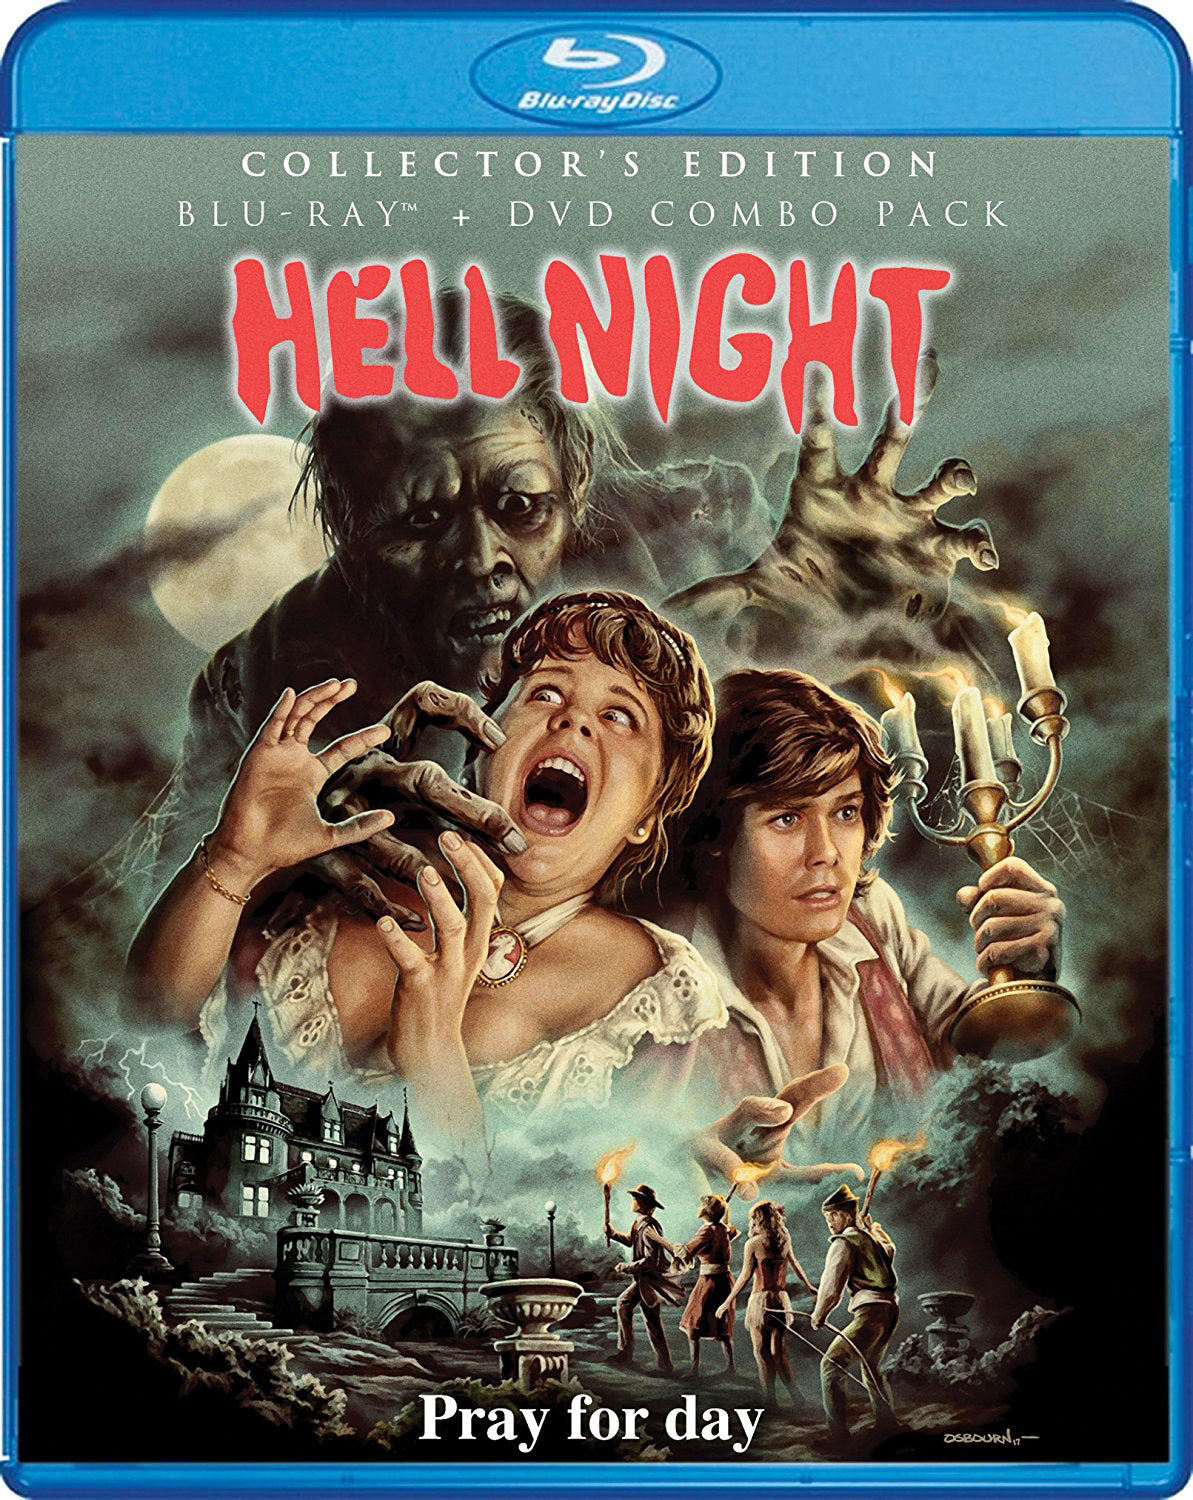 HELL NIGHT cover art